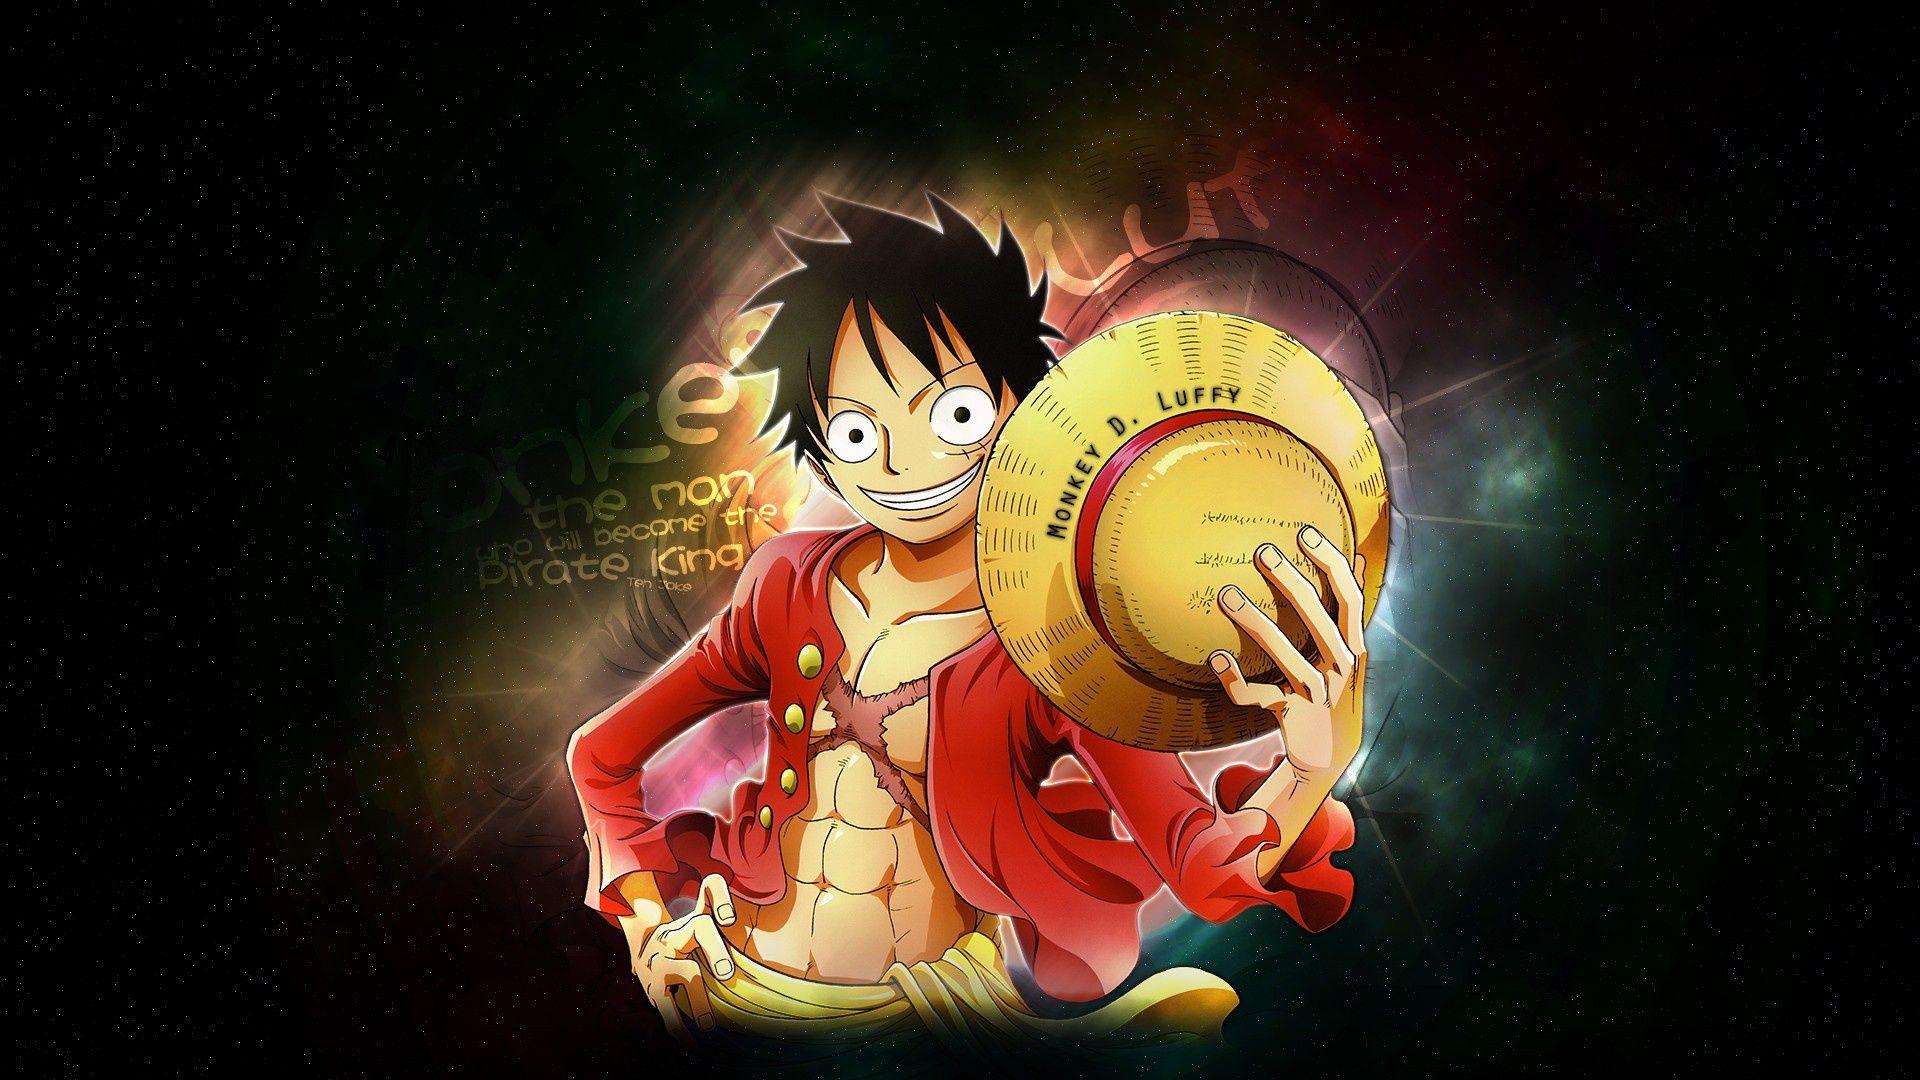 Monkey D Luffy Wallpapers Top Free Monkey D Luffy Backgrounds Wallpaperaccess - wallpaper direct download one piece monkey d luffy roblox